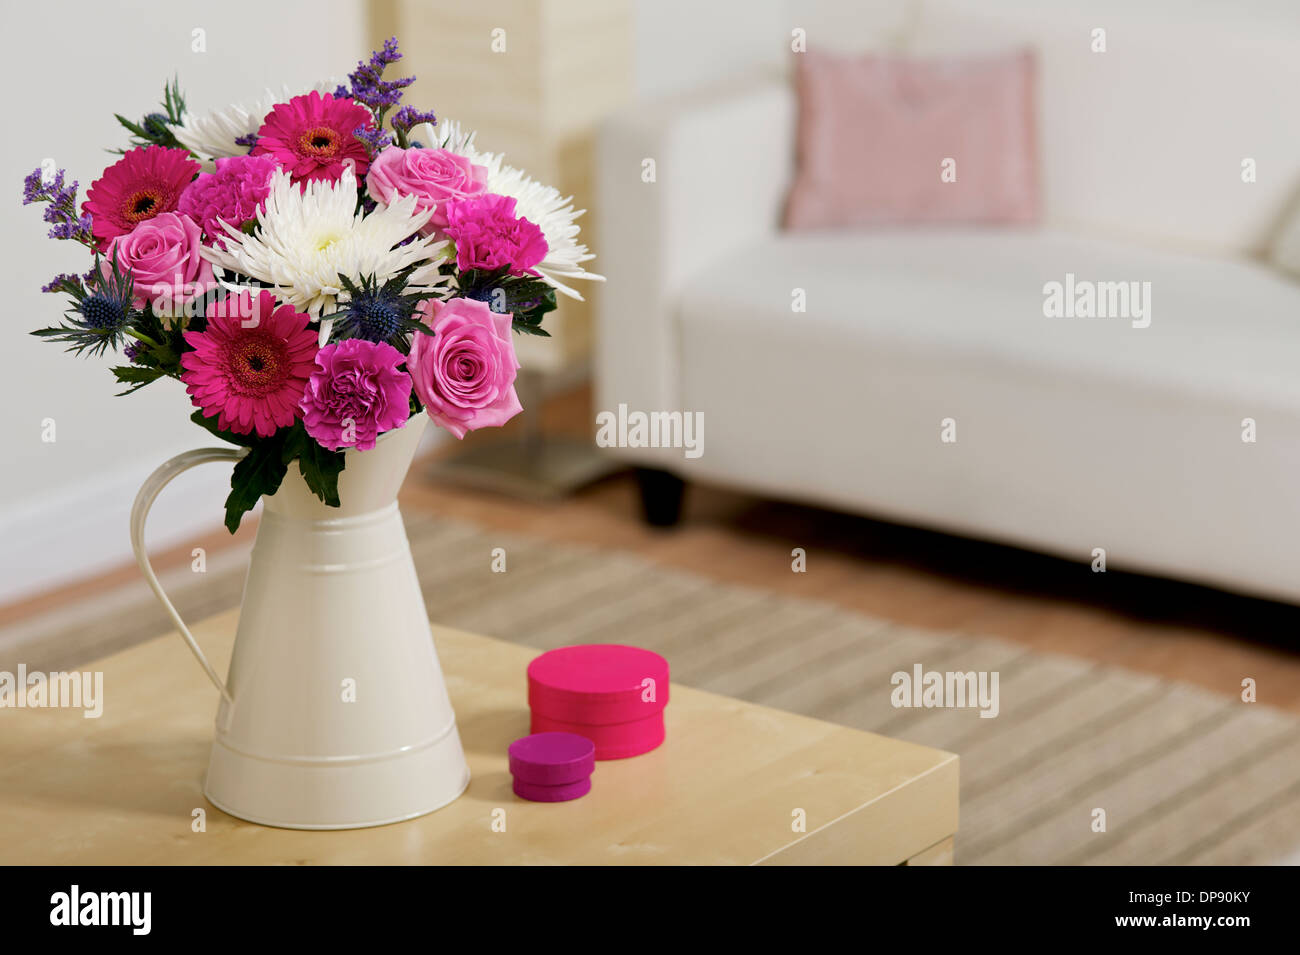 Bouquet of pink and white flowers in a cream vase or jug in a room settings Stock Photo